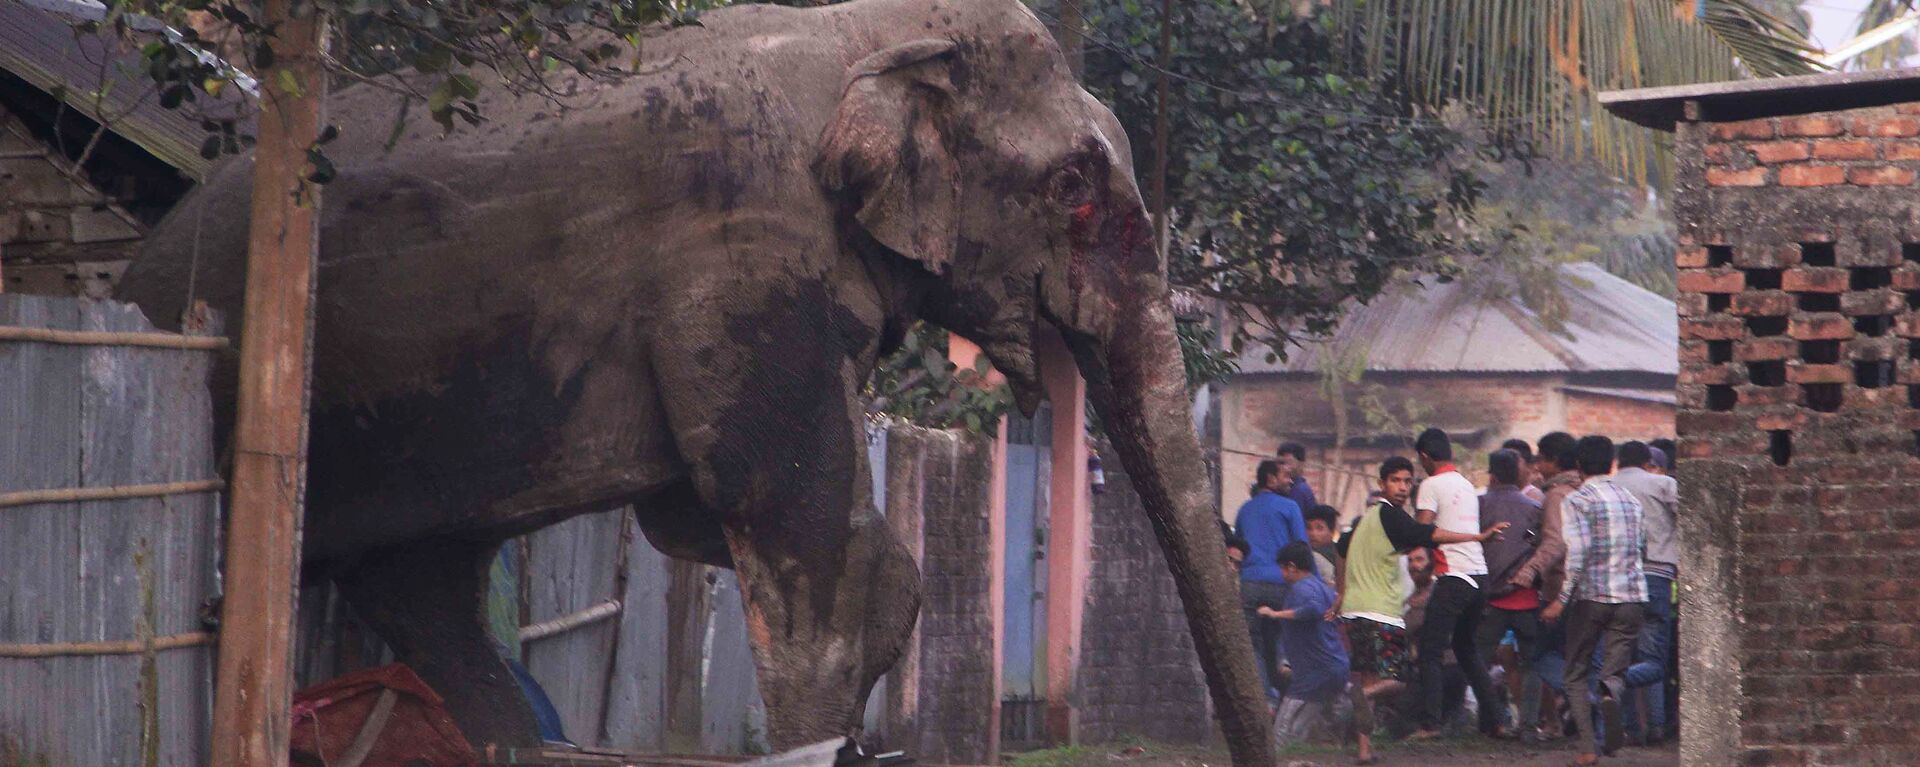 People run as they follow a wild elephant that strayed into the town of Siliguri in West Bengal state, India, Wednesday, Feb. 10, 2016. The elephant had wandered from the Baikunthapur forest on Wednesday, crossing roads and a small river before entering the town. The panicked elephant ran amok, trampling parked cars and motorbikes before it was tranquilized. - Sputnik भारत, 1920, 01.02.2023